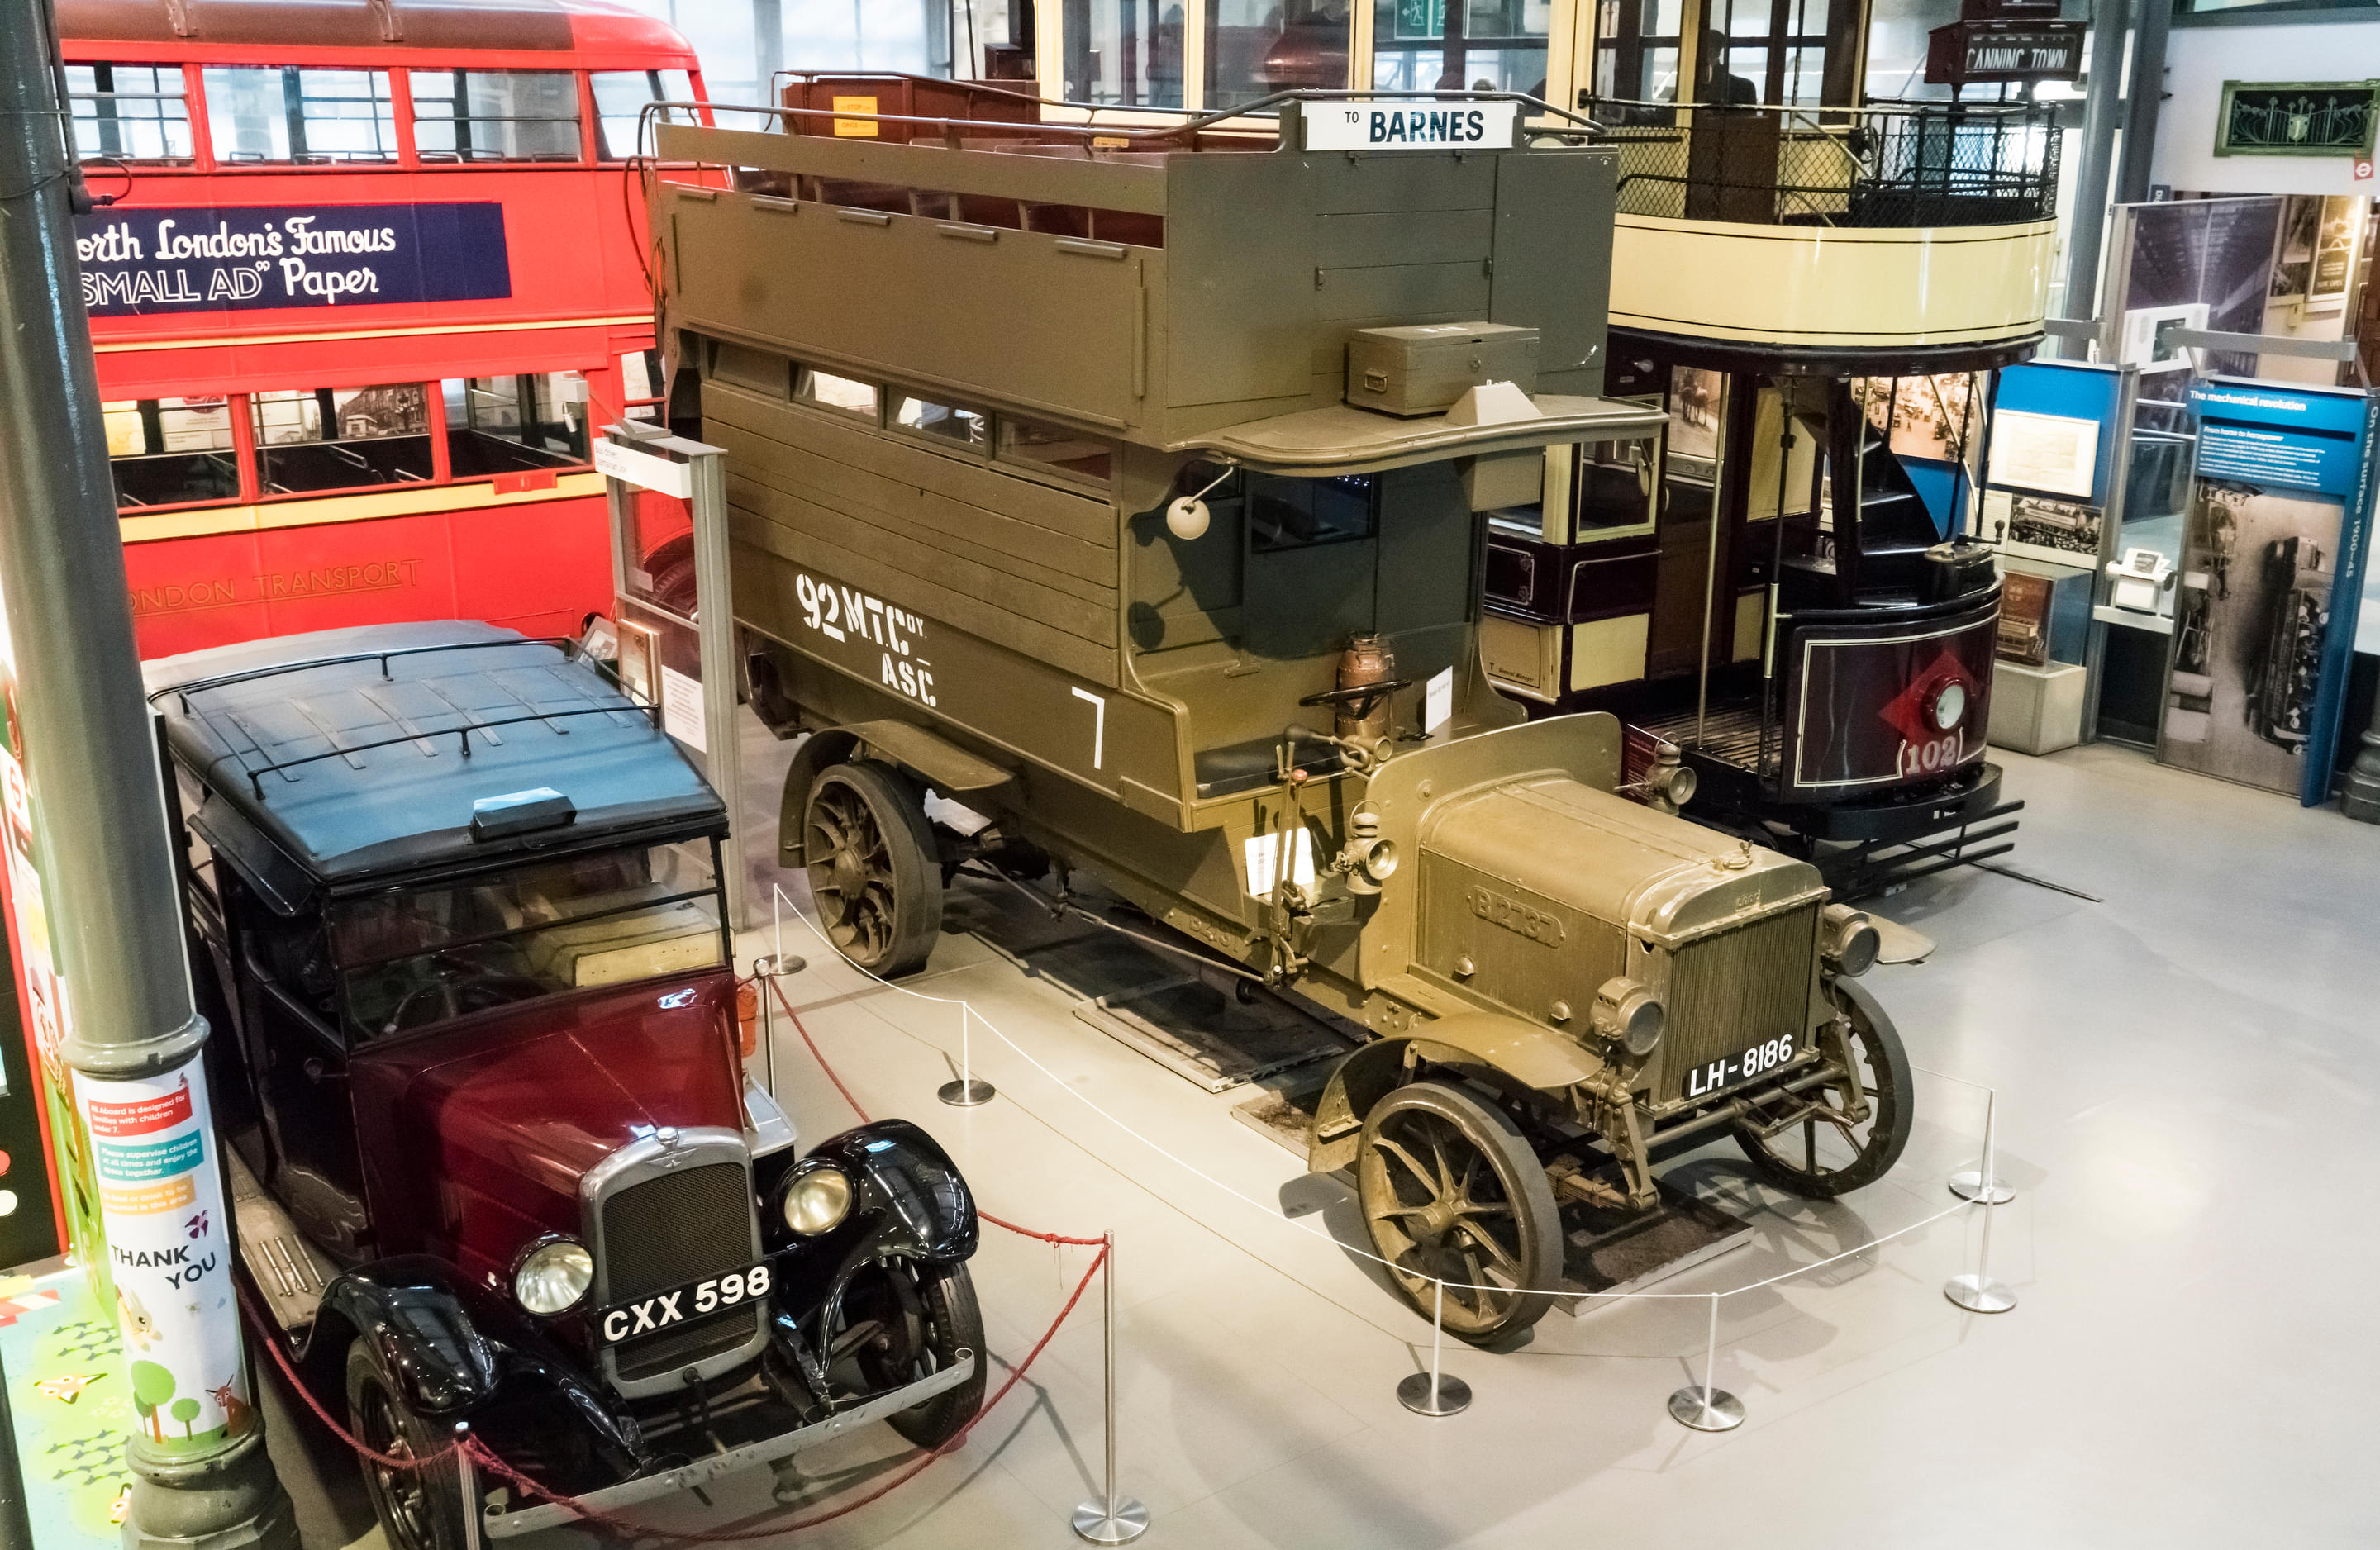 London Transport Museum Overview